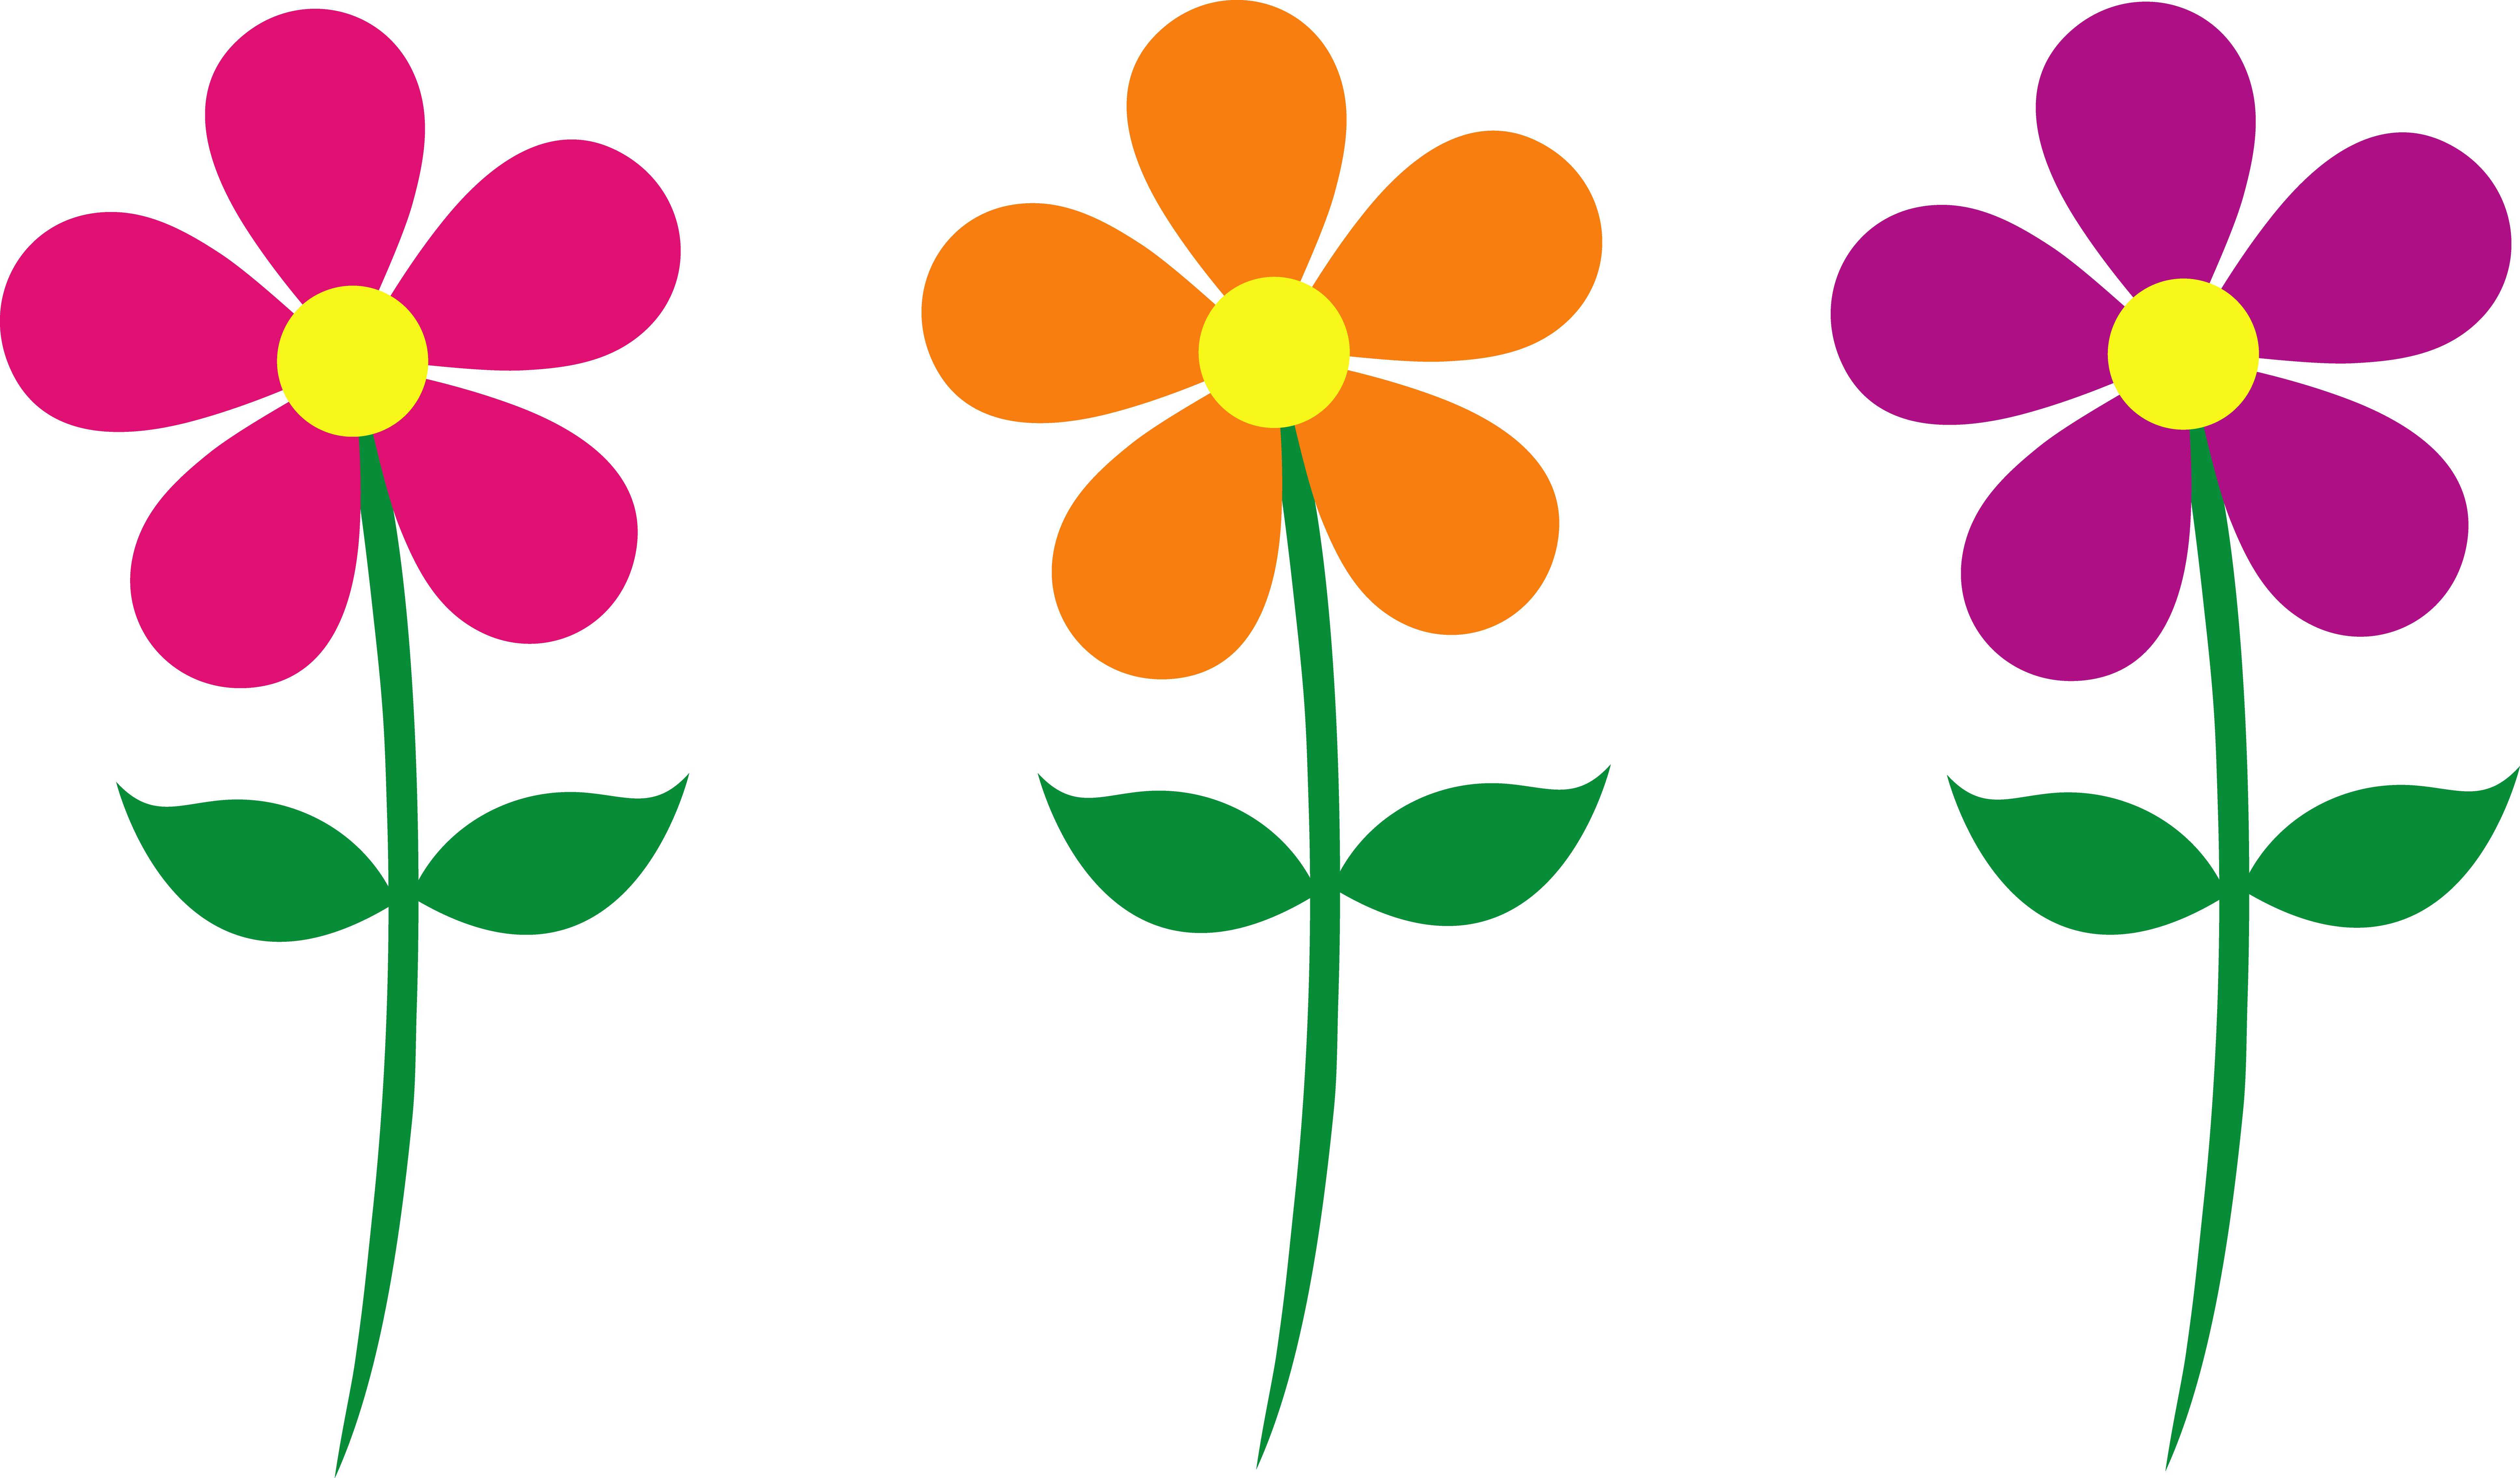 Picture of cartoon flowers